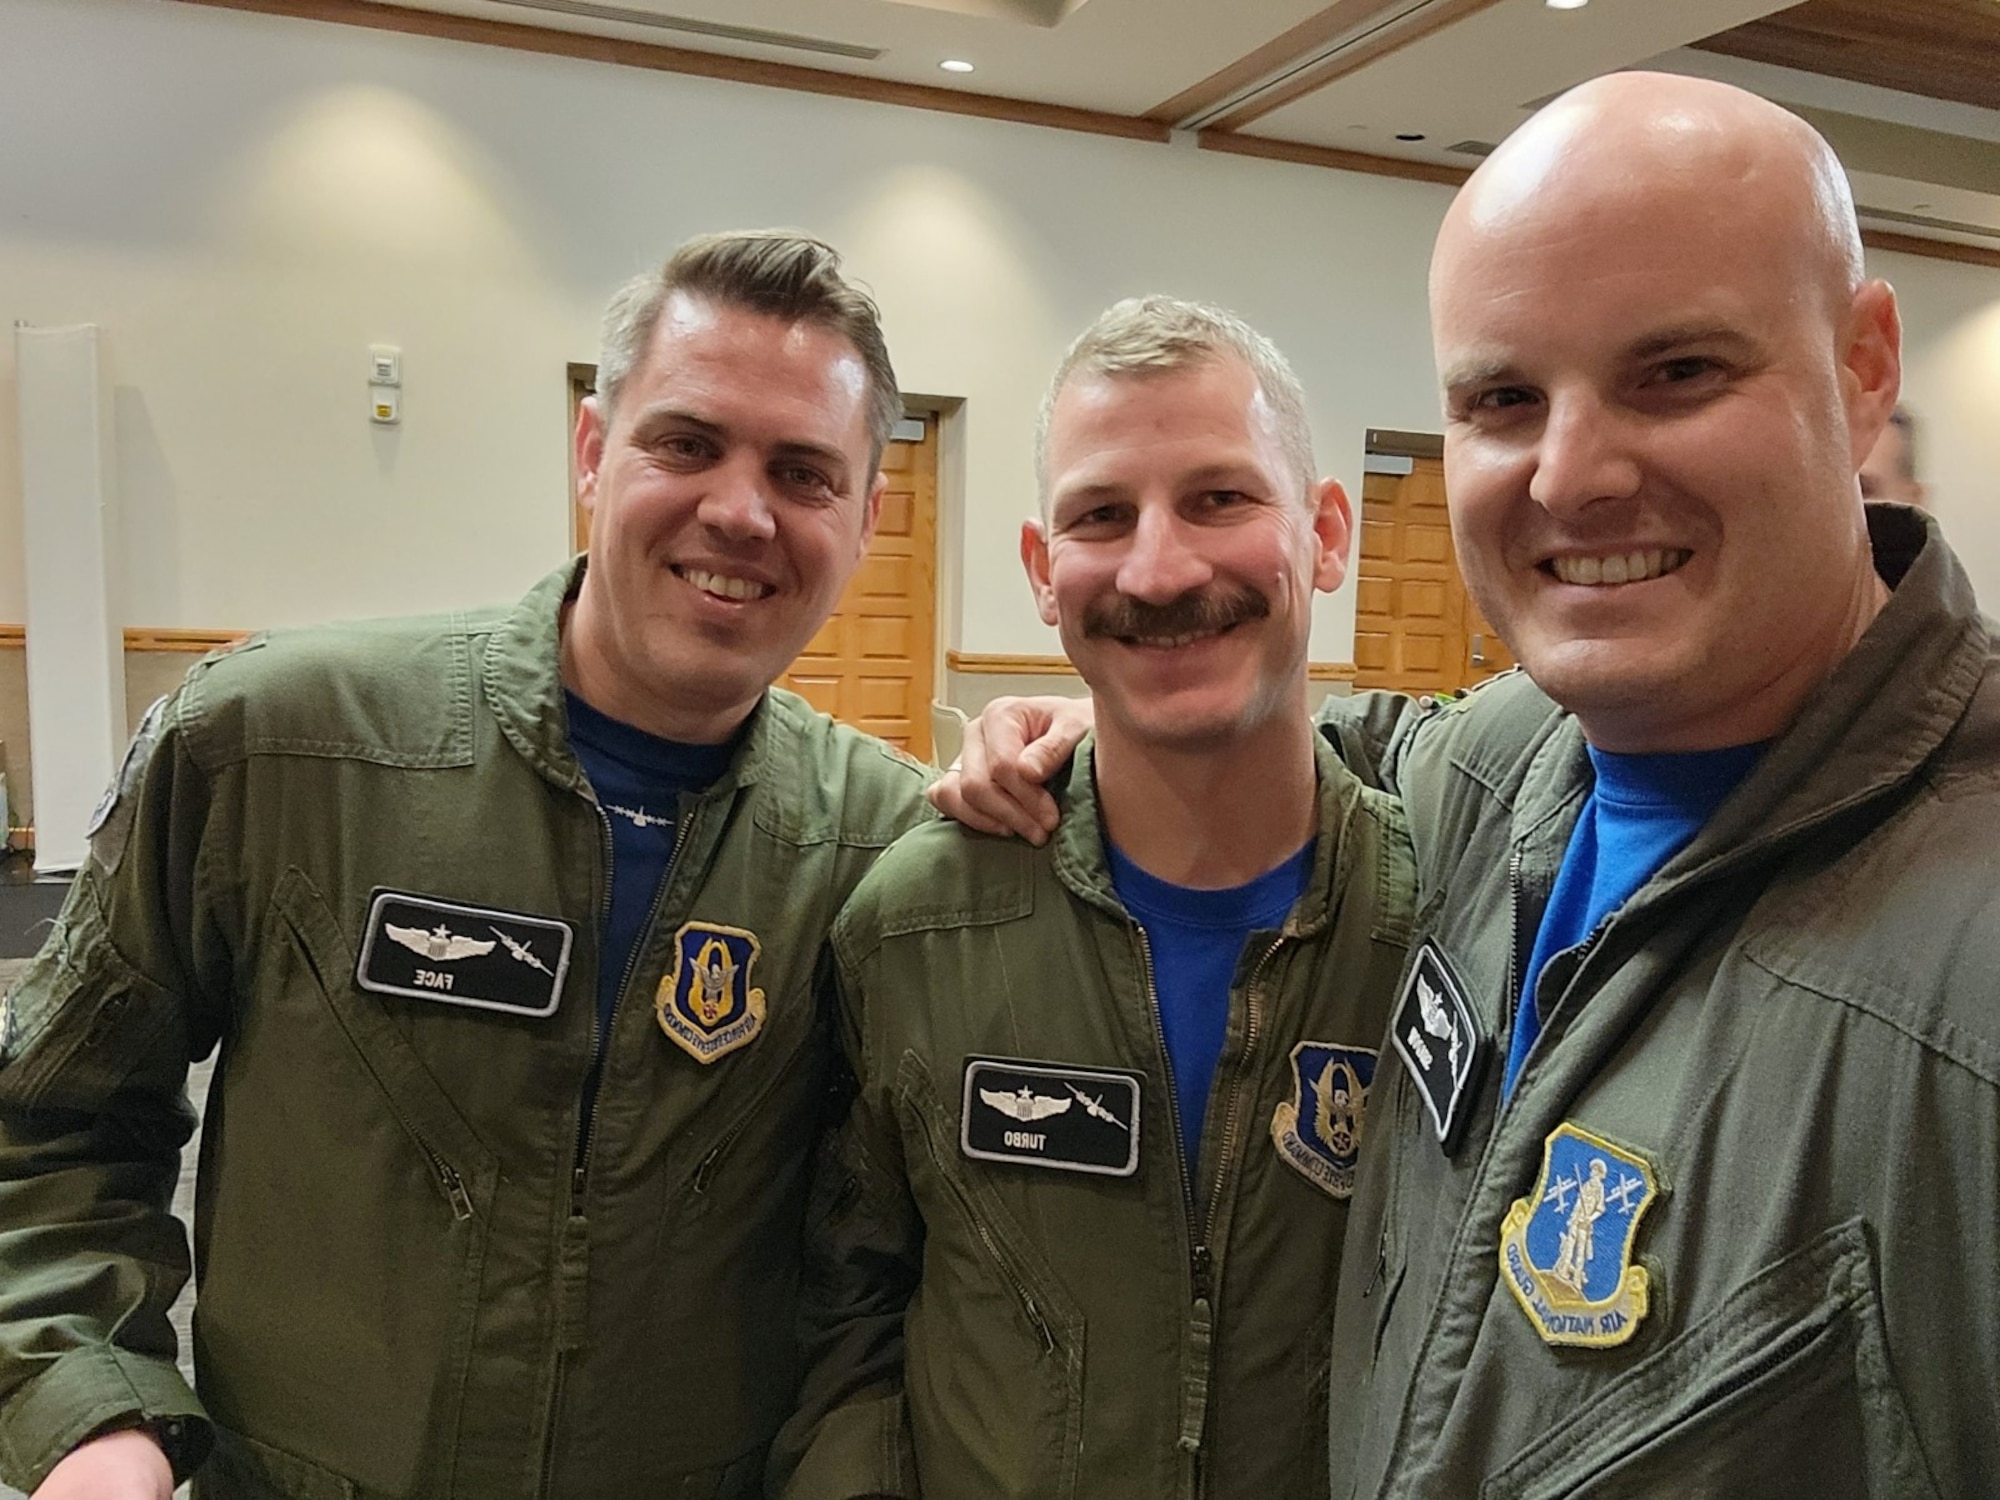 U.S. Air Force Maj. Cristopher “Face” Barber, Maj. Daniel “Turbo” Schei and Maj. Charles “Shadow” Moore pose for a group photo in Nellis Air Force Base, Nev., Dec. 9, 2022.